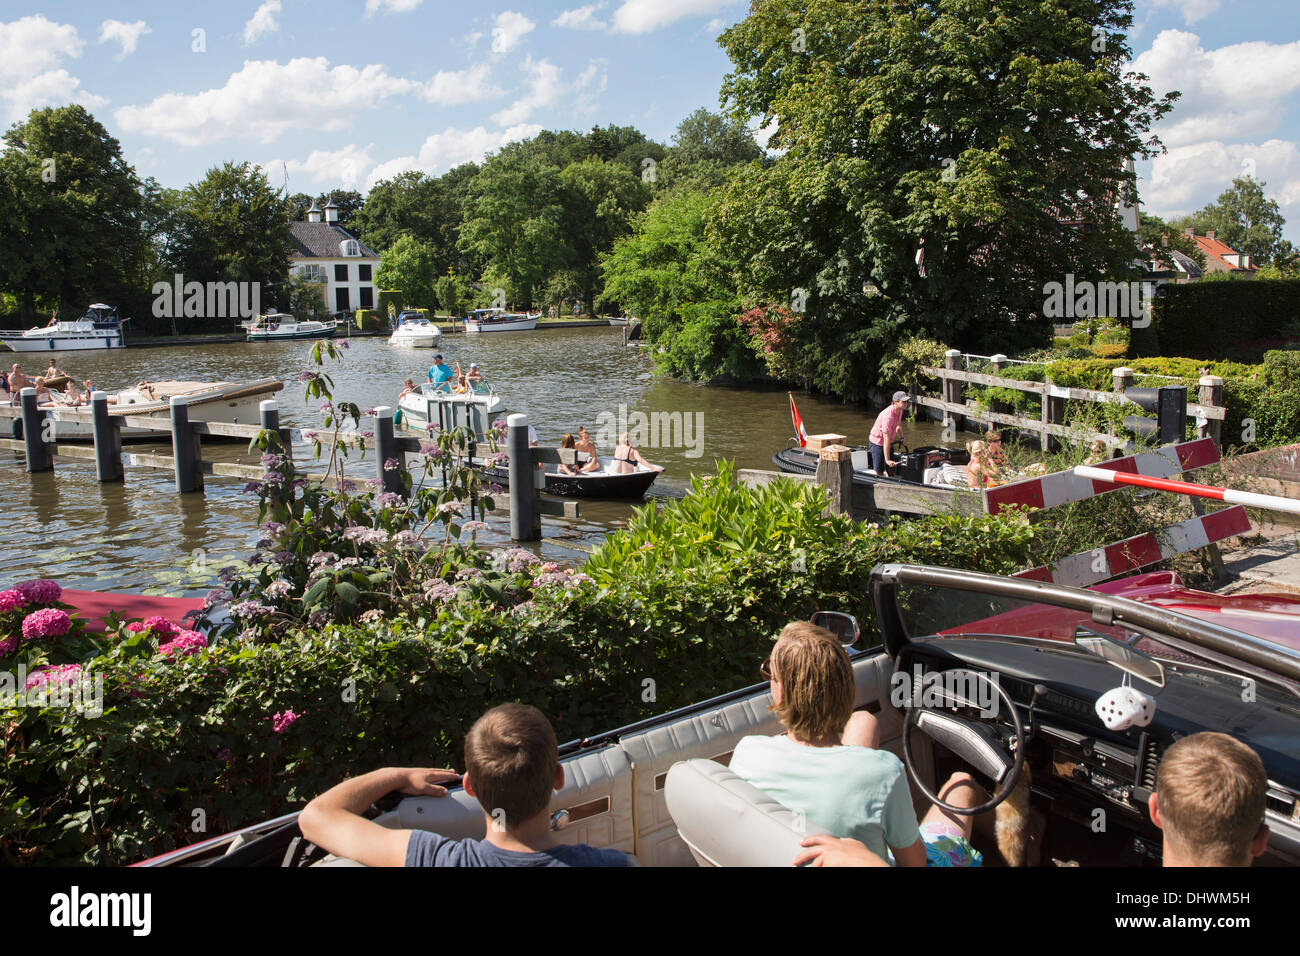 Netherlands, Loenen aan de Vecht. River Vecht. Boys in old fashioned car looking at yachts in the river Stock Photo